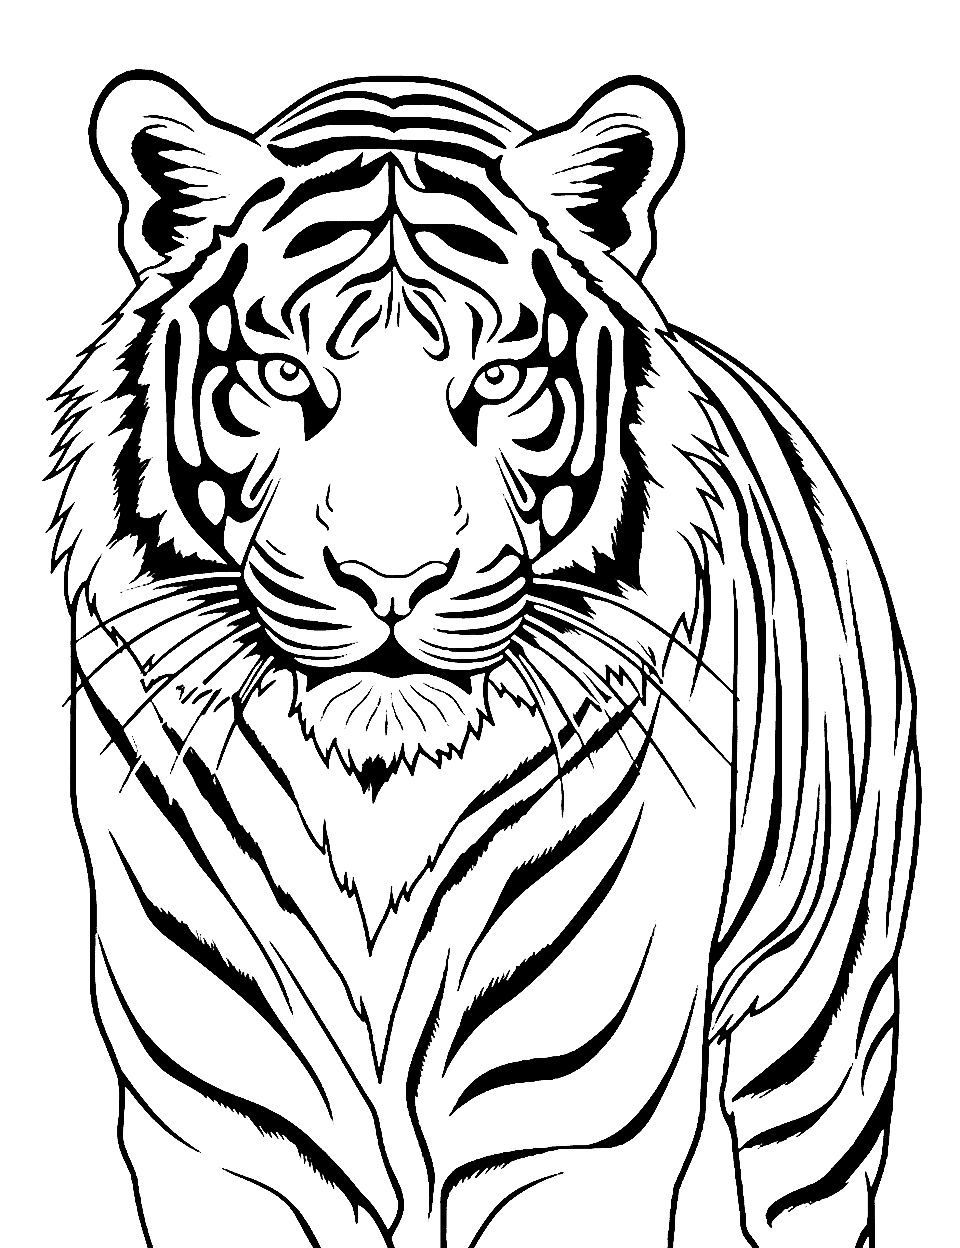 Easy Tiger Face Coloring Page - A close-up of a tiger’s face, focusing on its eyes and whiskers.